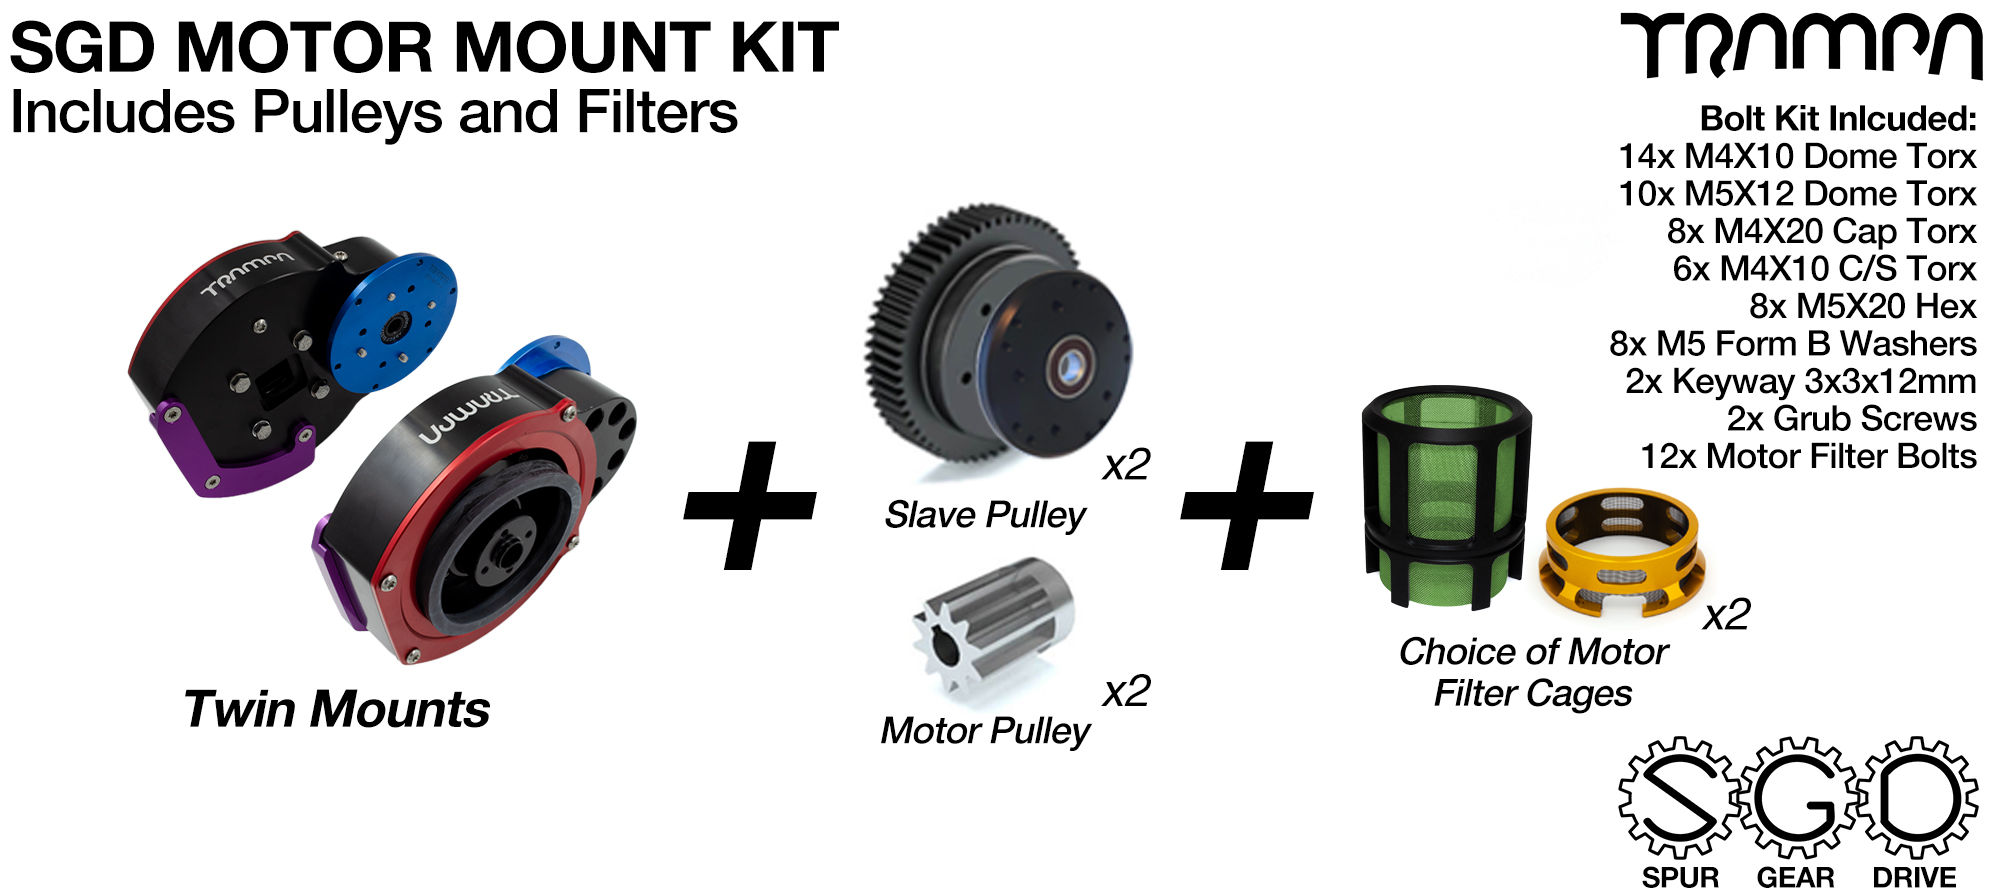 SGD 2WD Motor Mount with PULLEYS & FILTERS - NO Motors - Drift-E-Trike